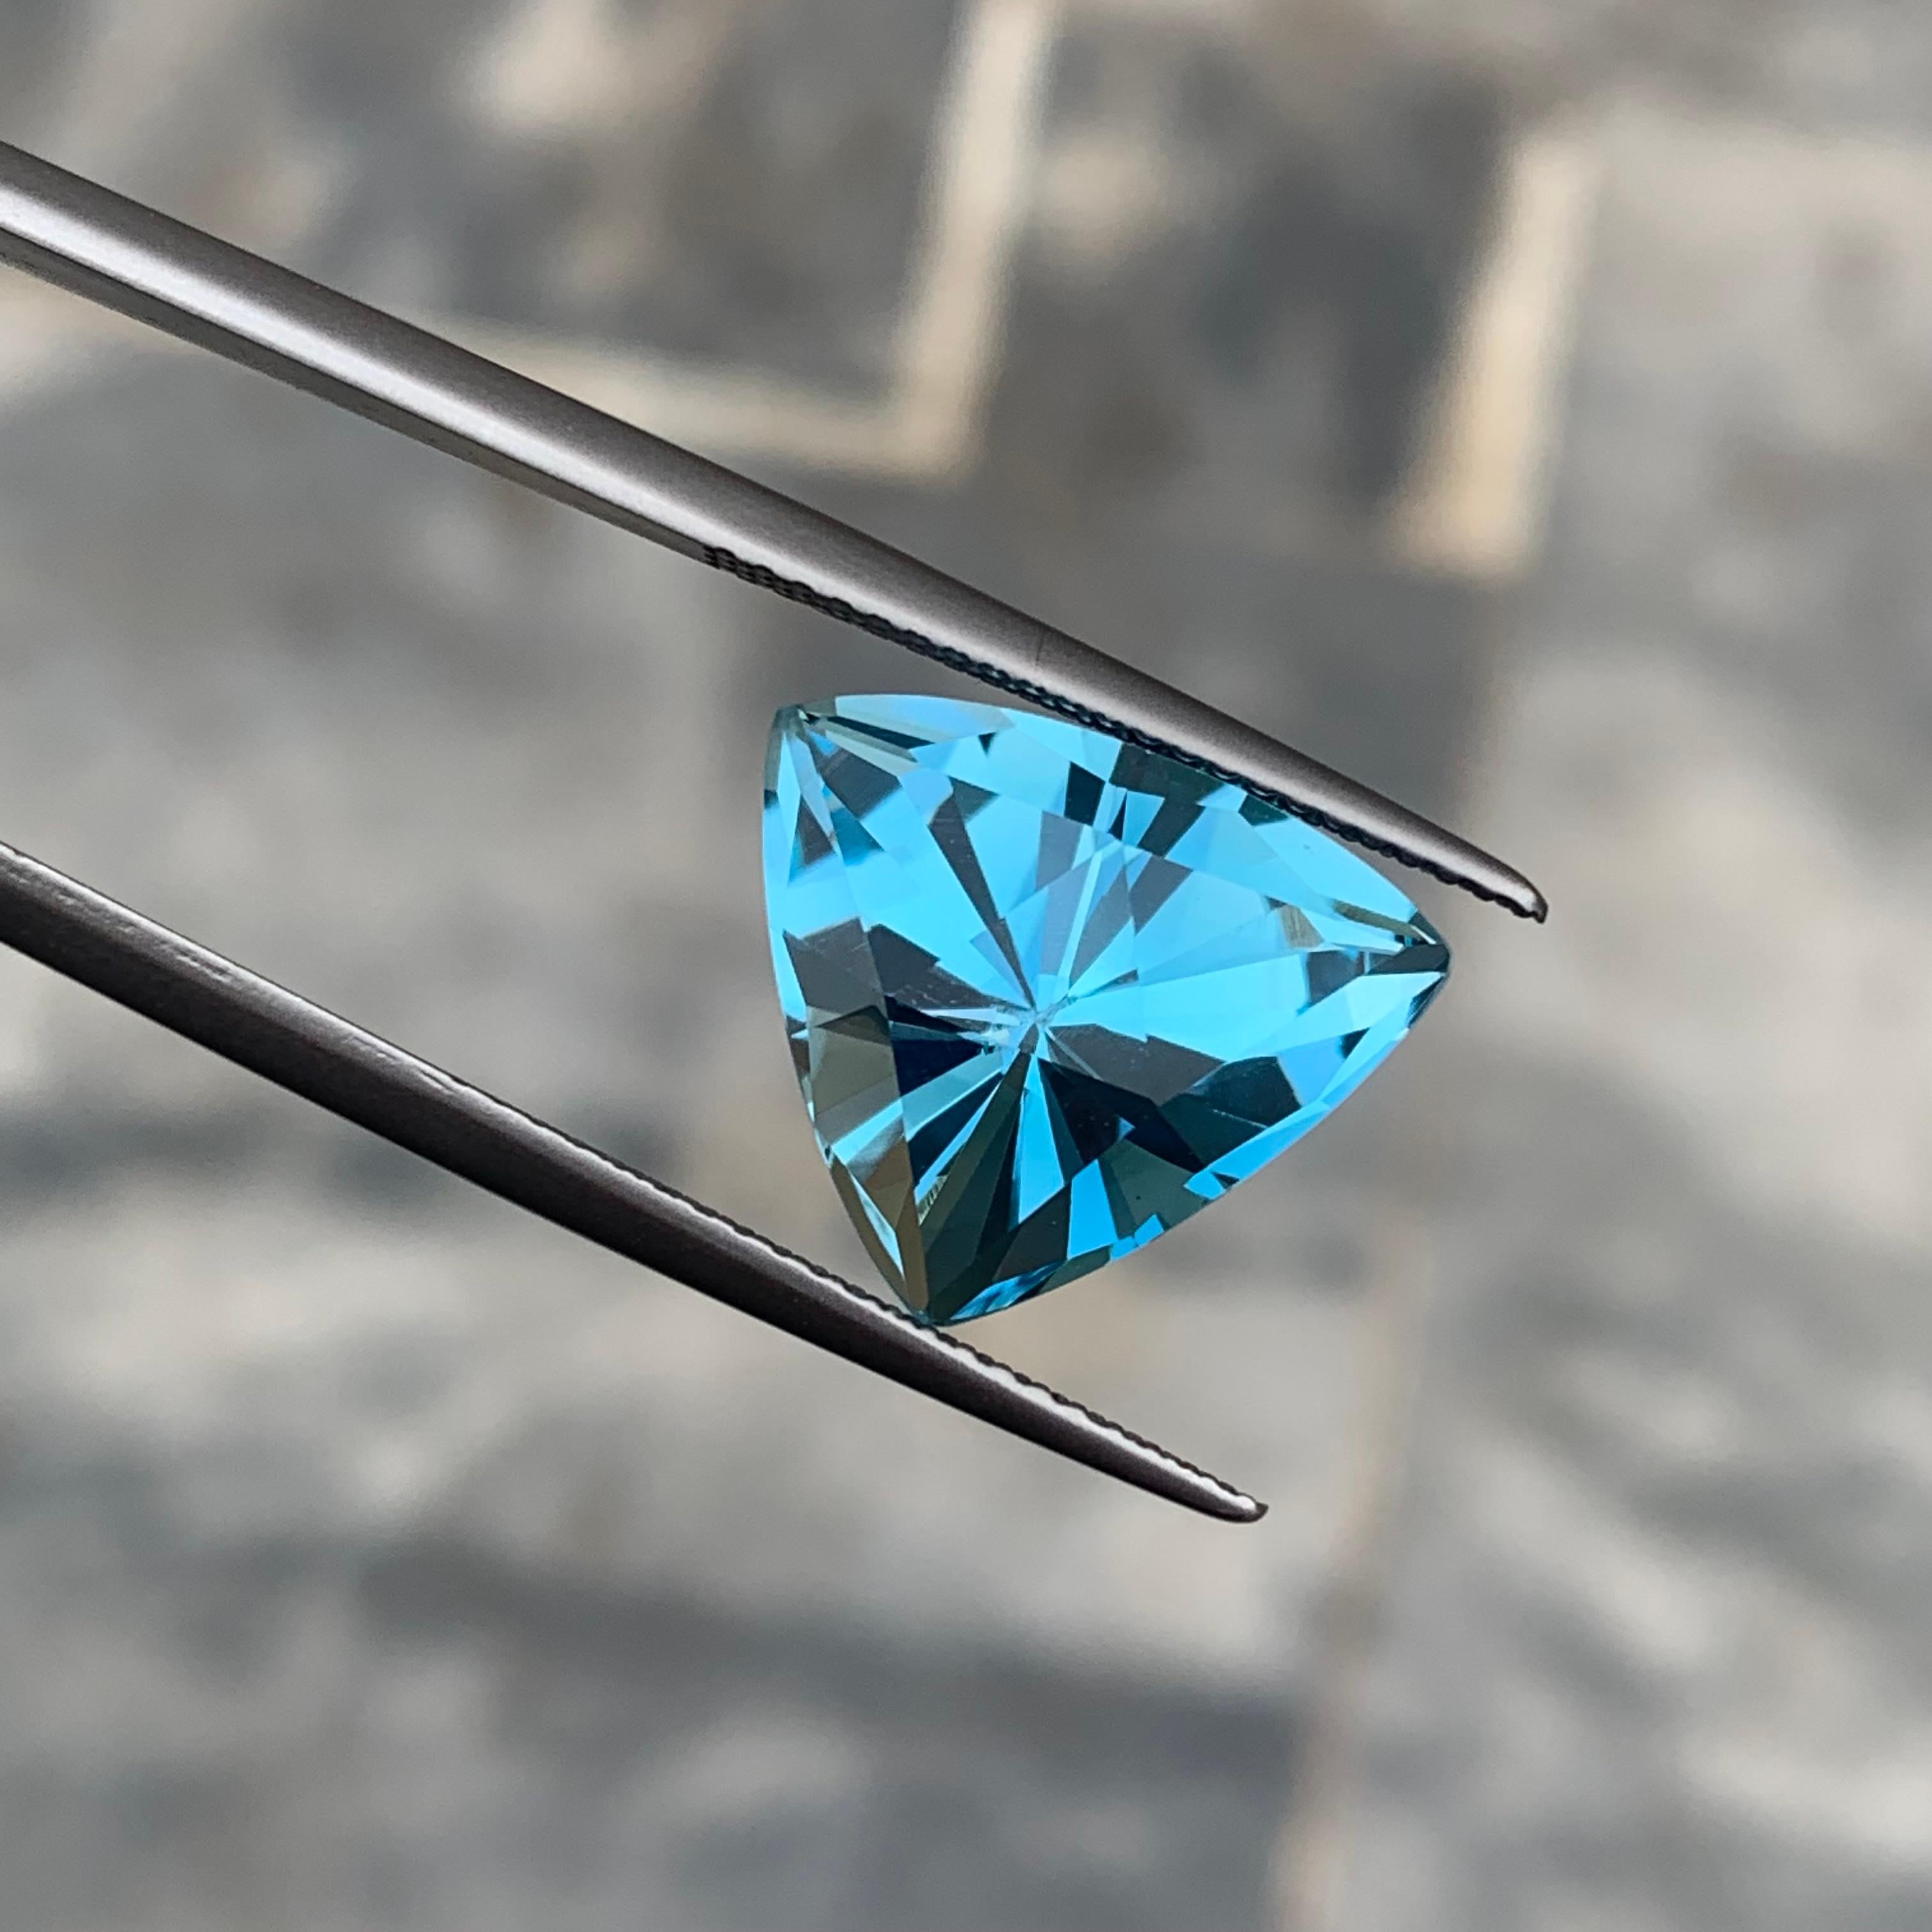 Gemstone Type : Faceted Blue Topaz 
Weight : 9.0 Carats
Dimensions : 12.8x14.4x9.1 Mm
Origin : Brazil
Clarity : Eye Clean
Shape: Trillion
Color: Blue
Certificate: On Demand
Blue Topaz Metaphysical Properties
Blue topaz, in particular, is believed to